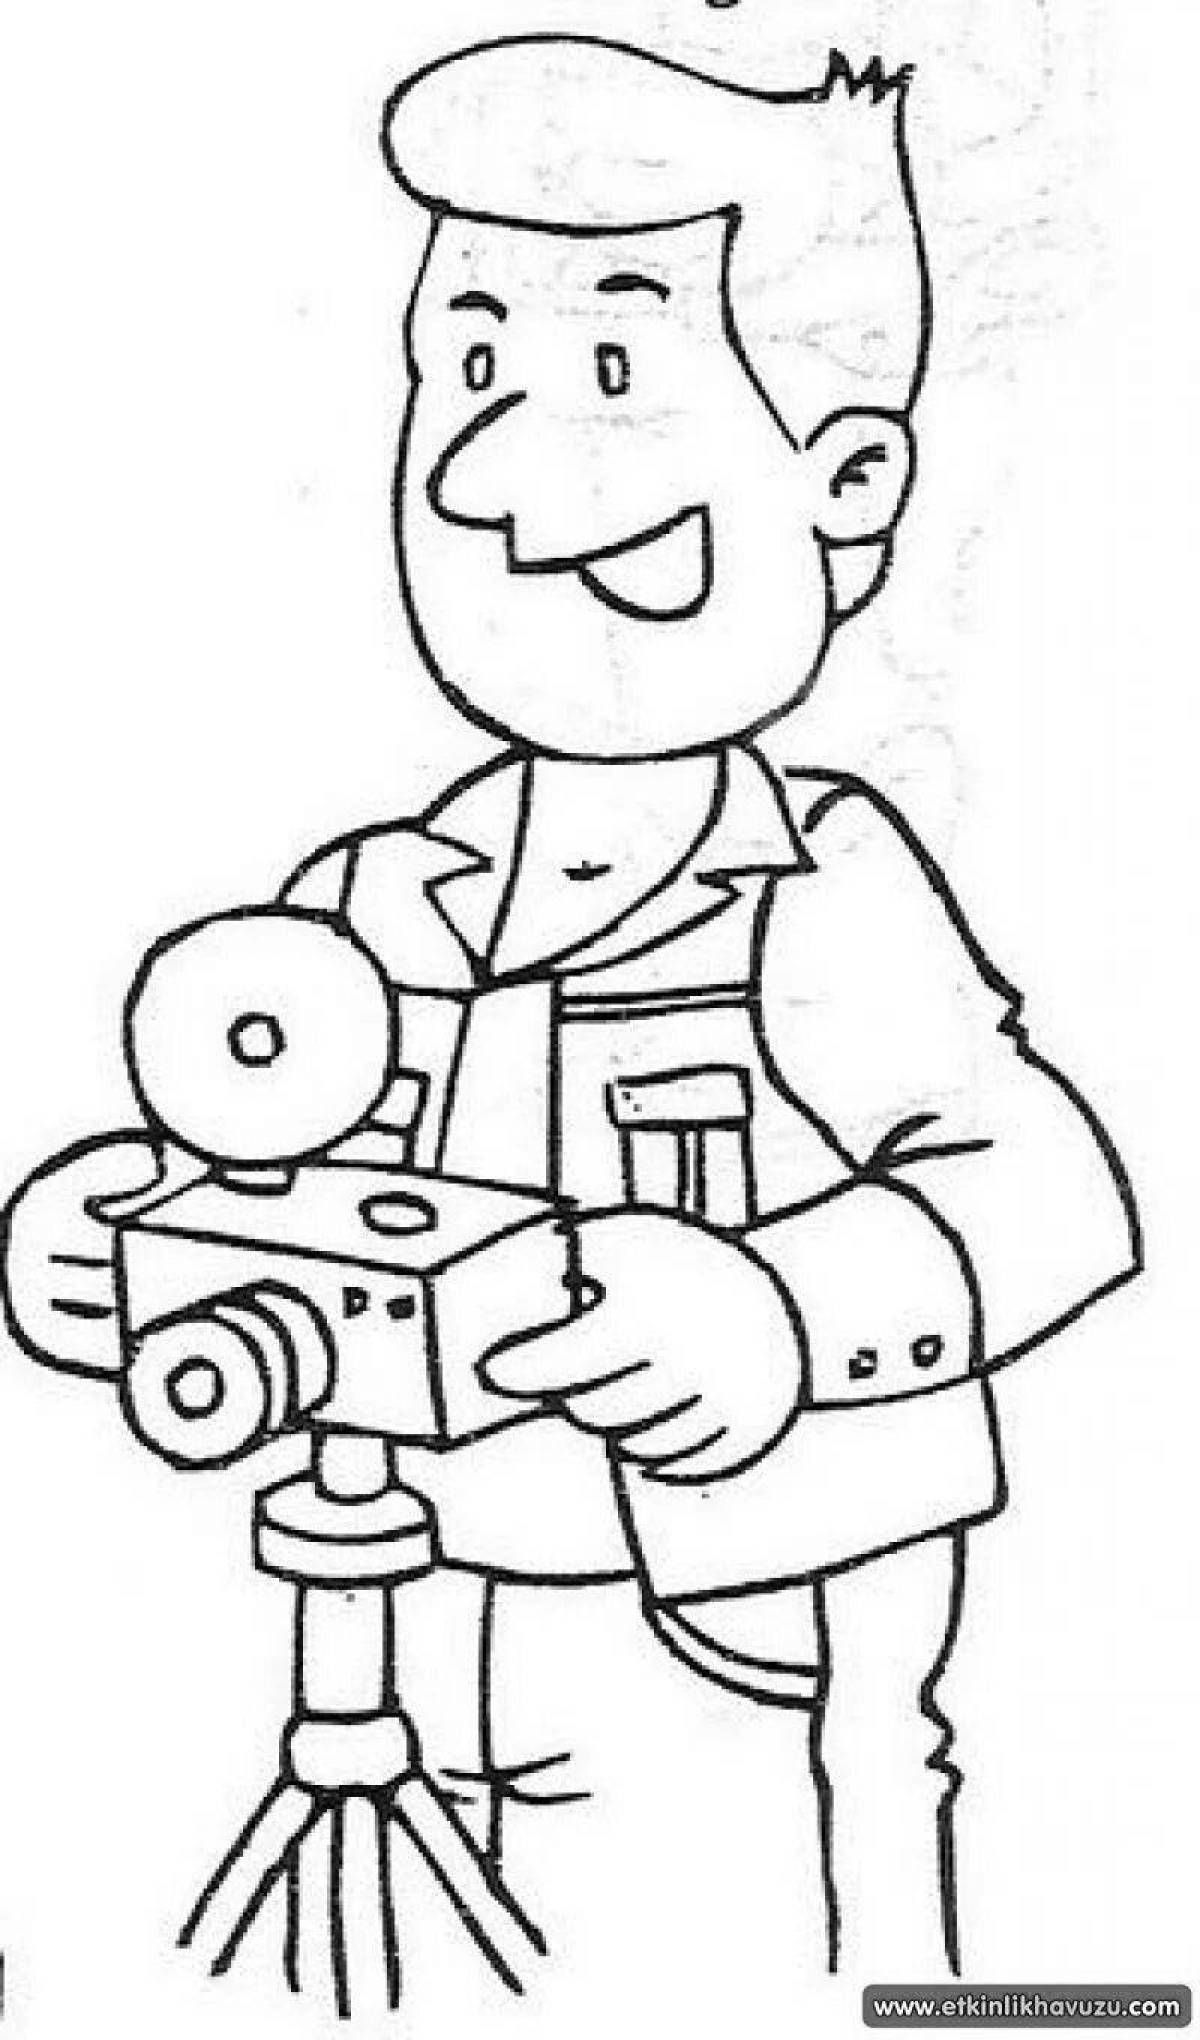 Colorful job coloring pages for preschoolers